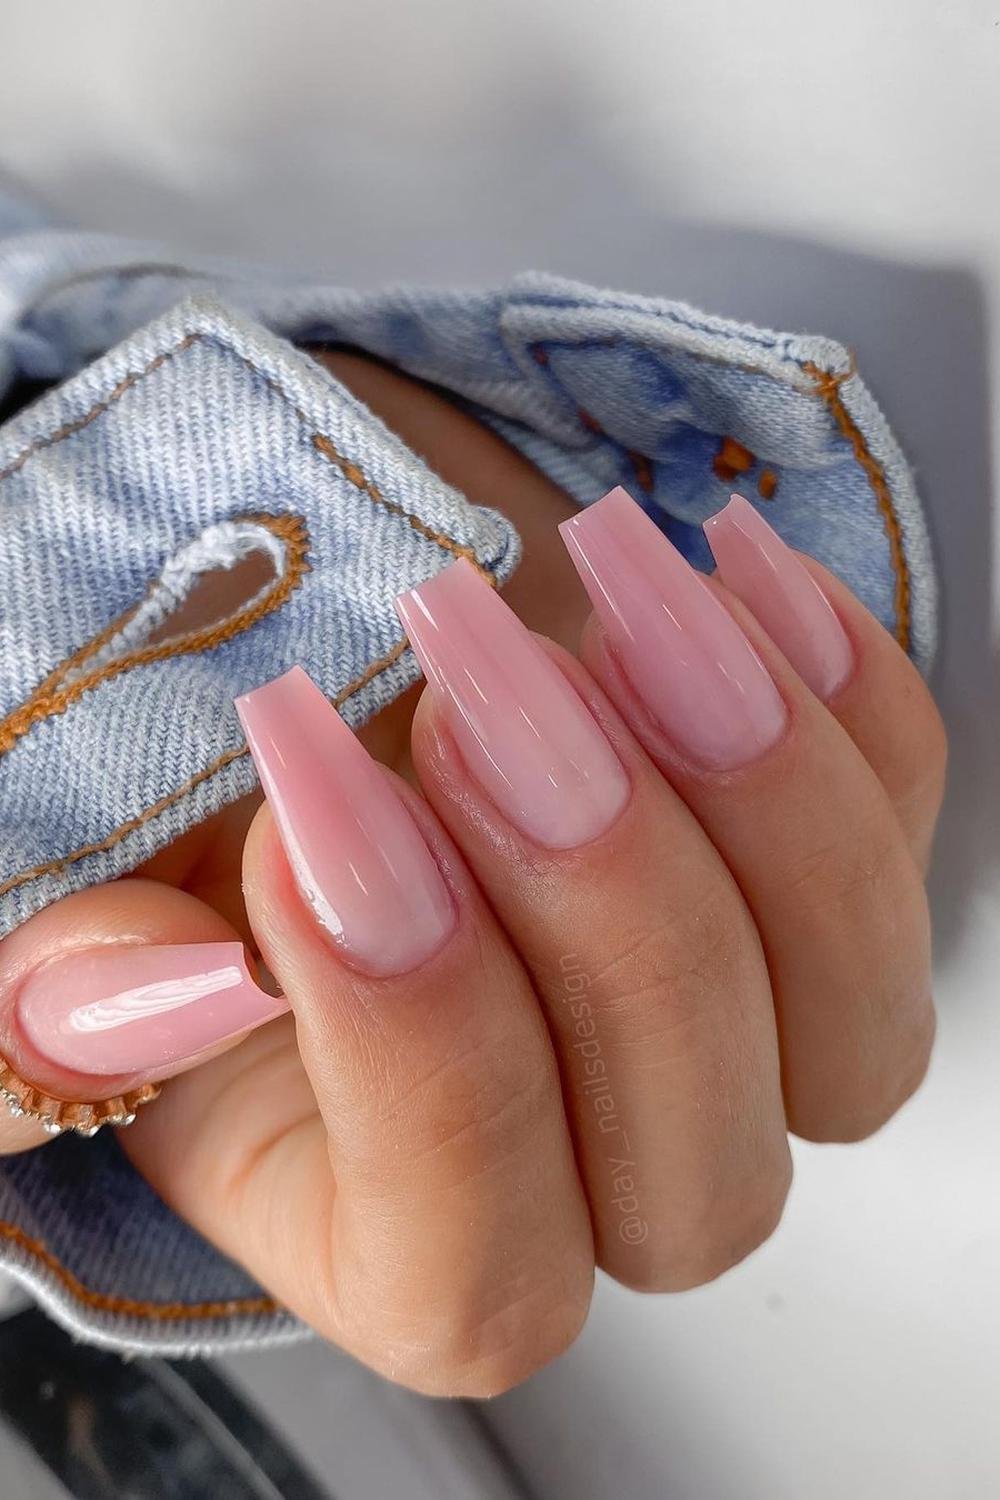 11 - Picture of Ballerina Nails